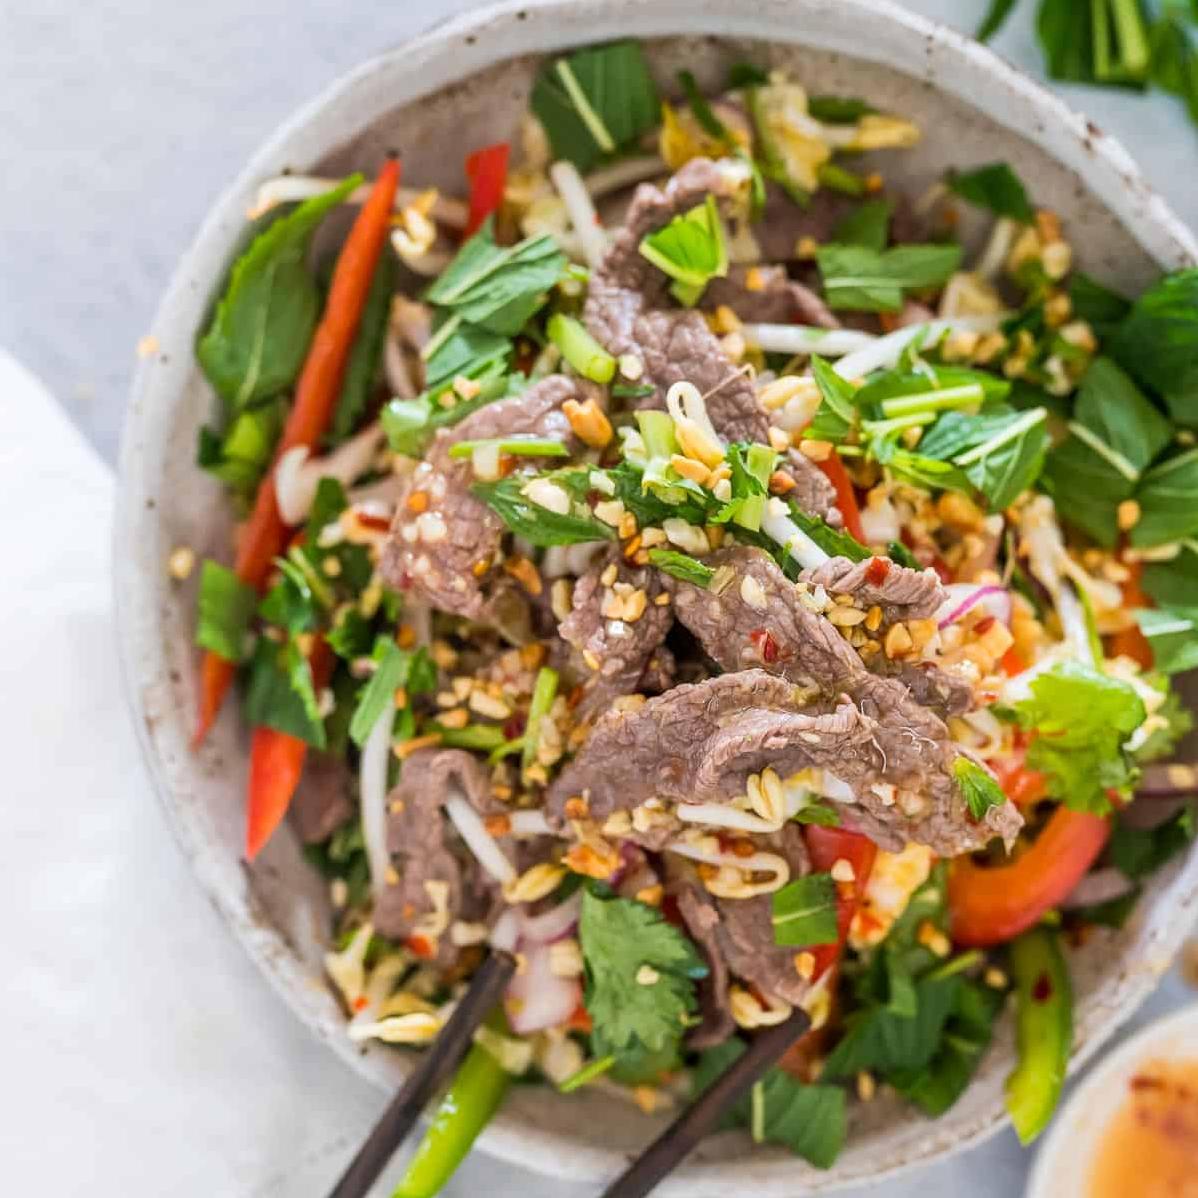  This steak salad is a perfect blend of savory and fresh flavors!